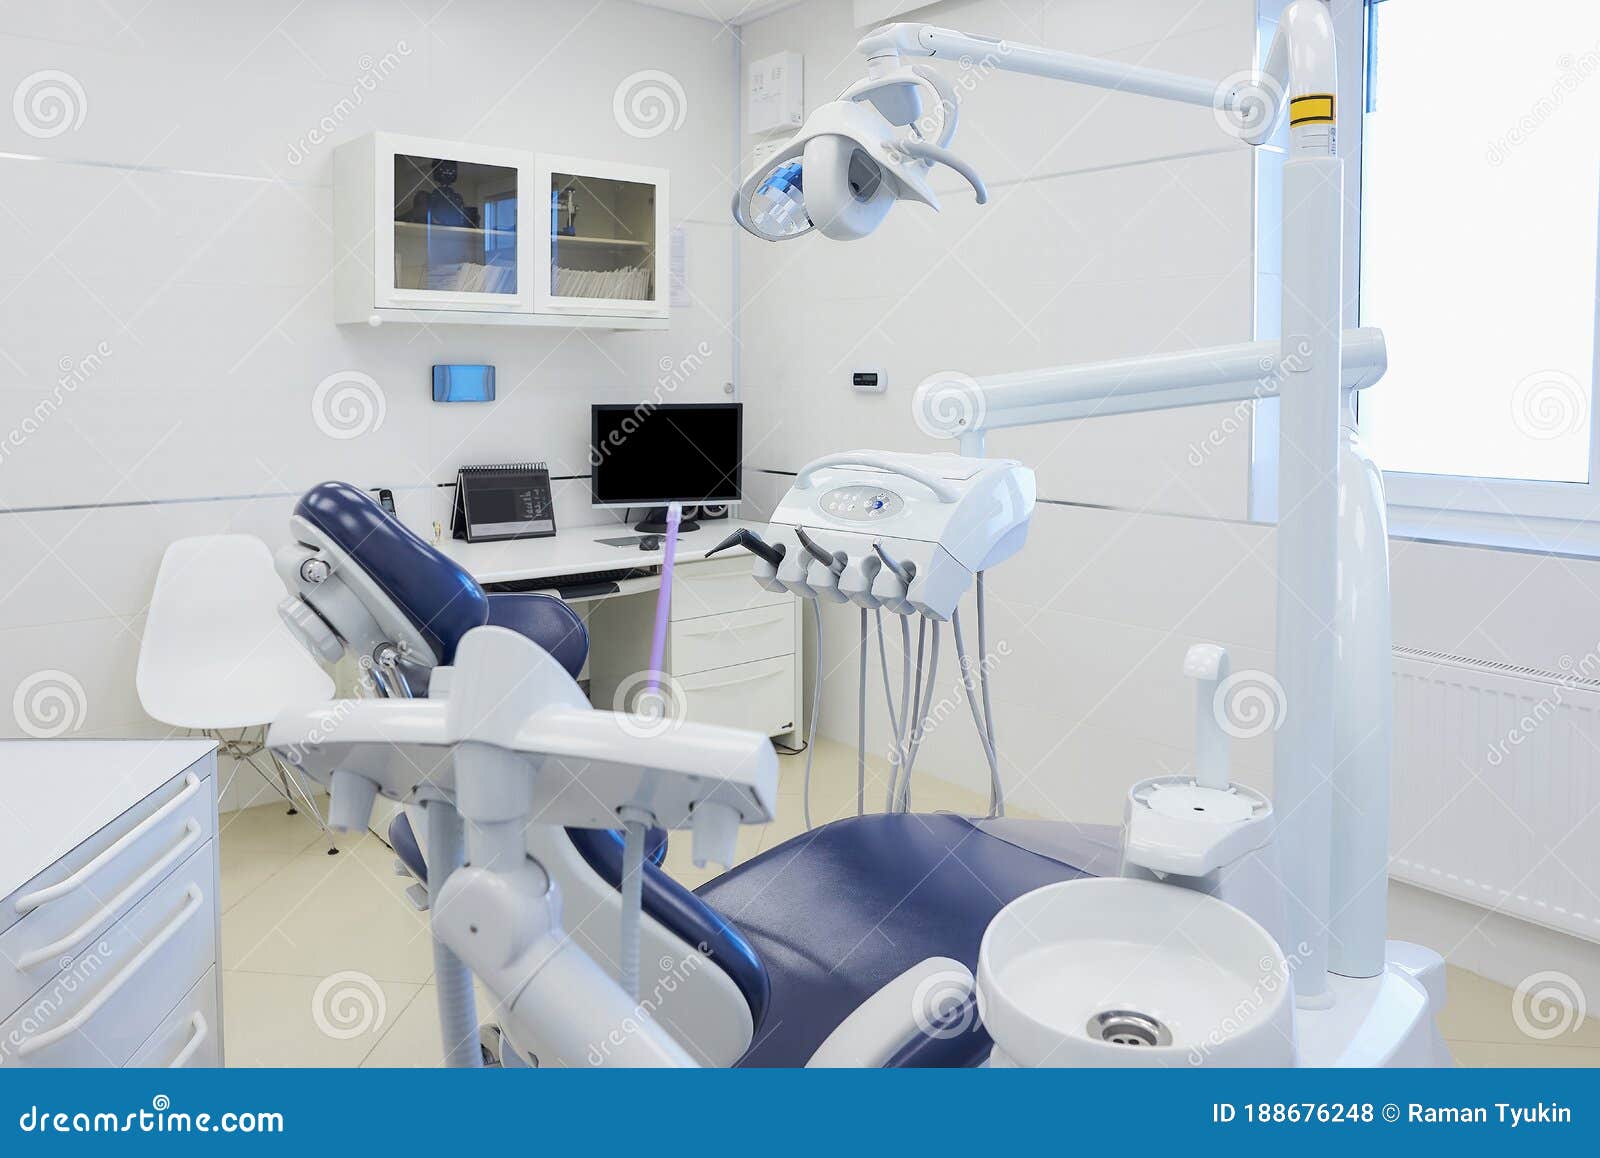 an interior of a dental office with white and blue furniture. dentistÃ¢â¬â¢s office